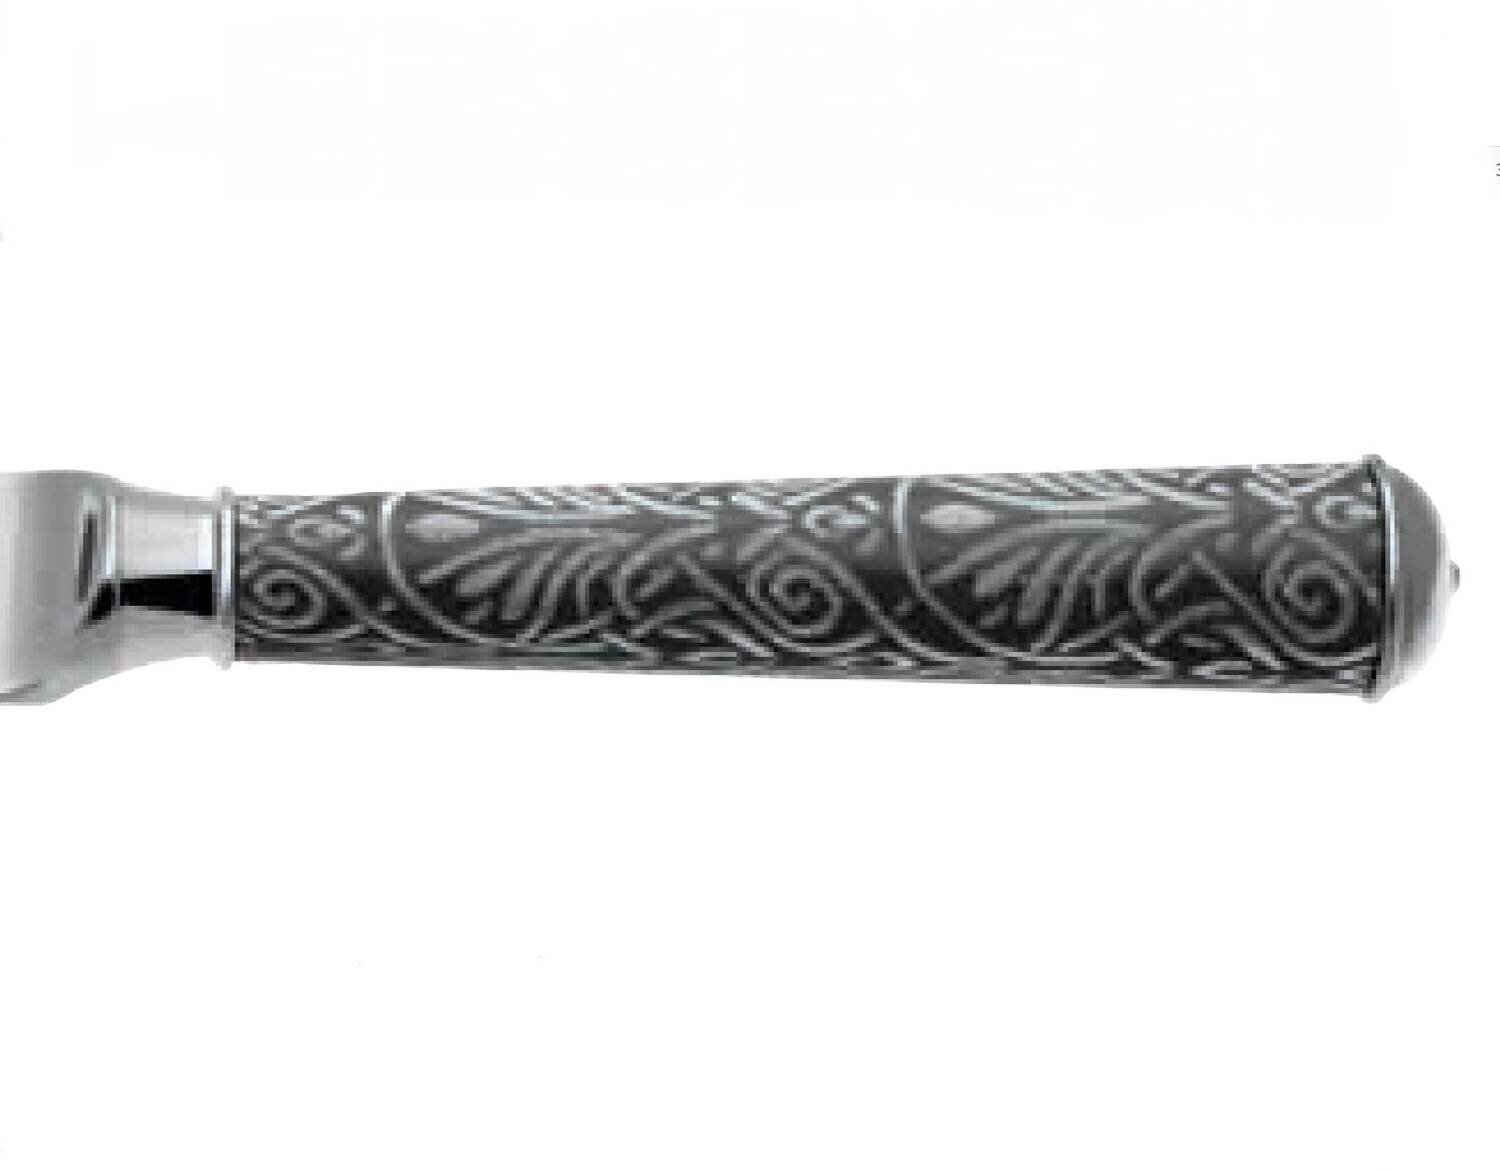 Ercuis Guirlande Lagoon Dessert Knife 8.375 Inch Silver Plated Part Golded F60251S-06